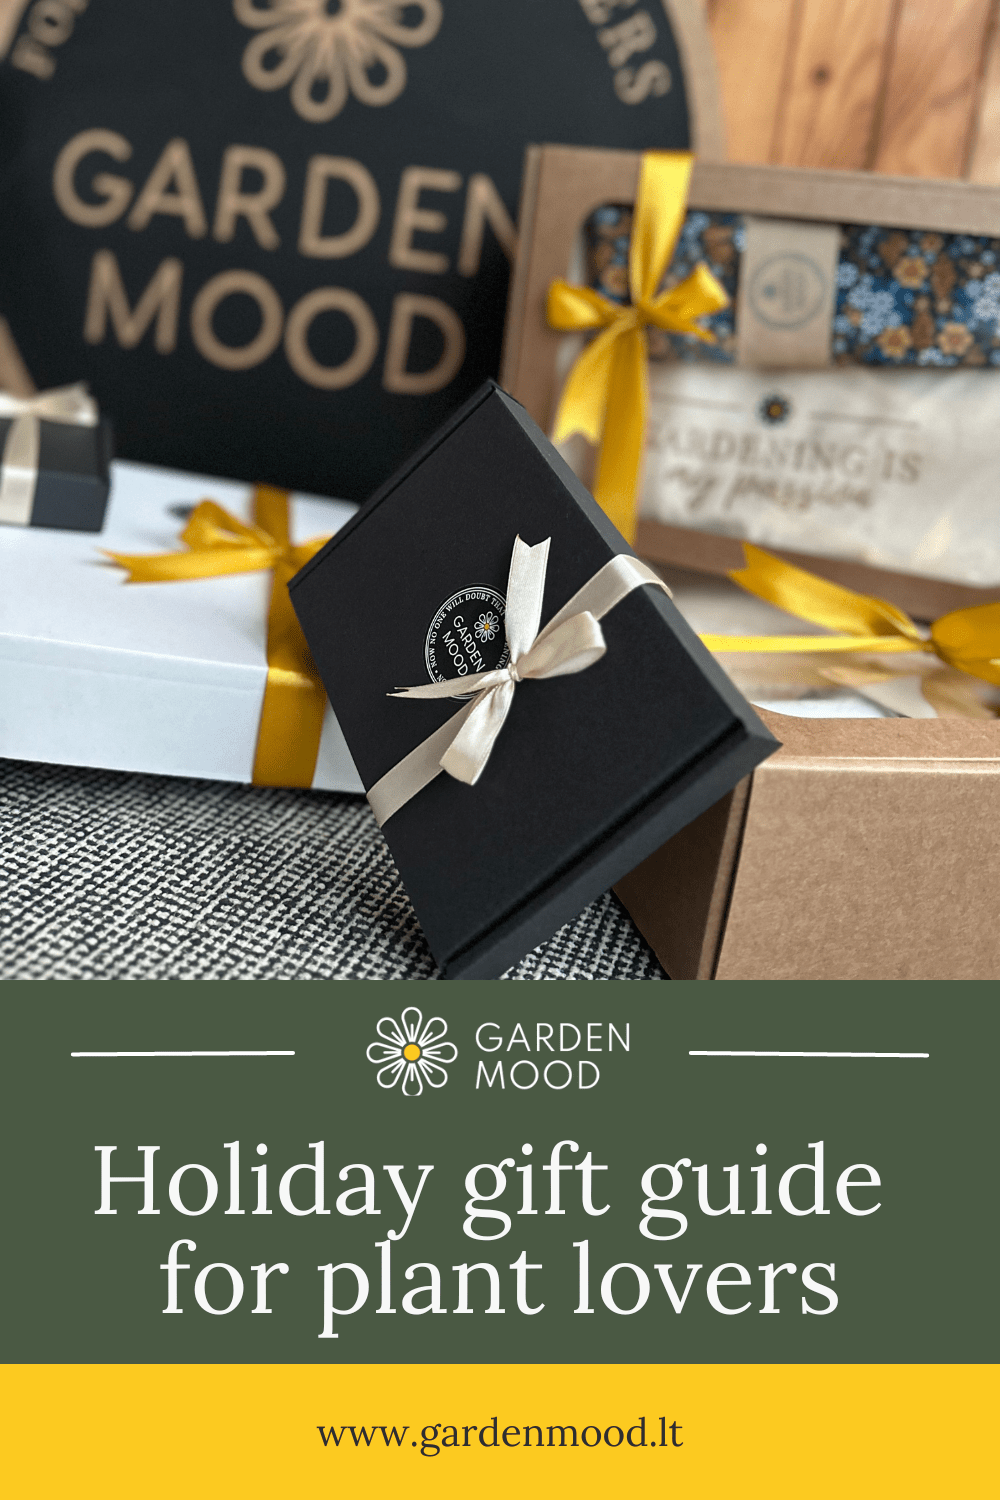 Holiday gift guide for plants lovers (gardeners)